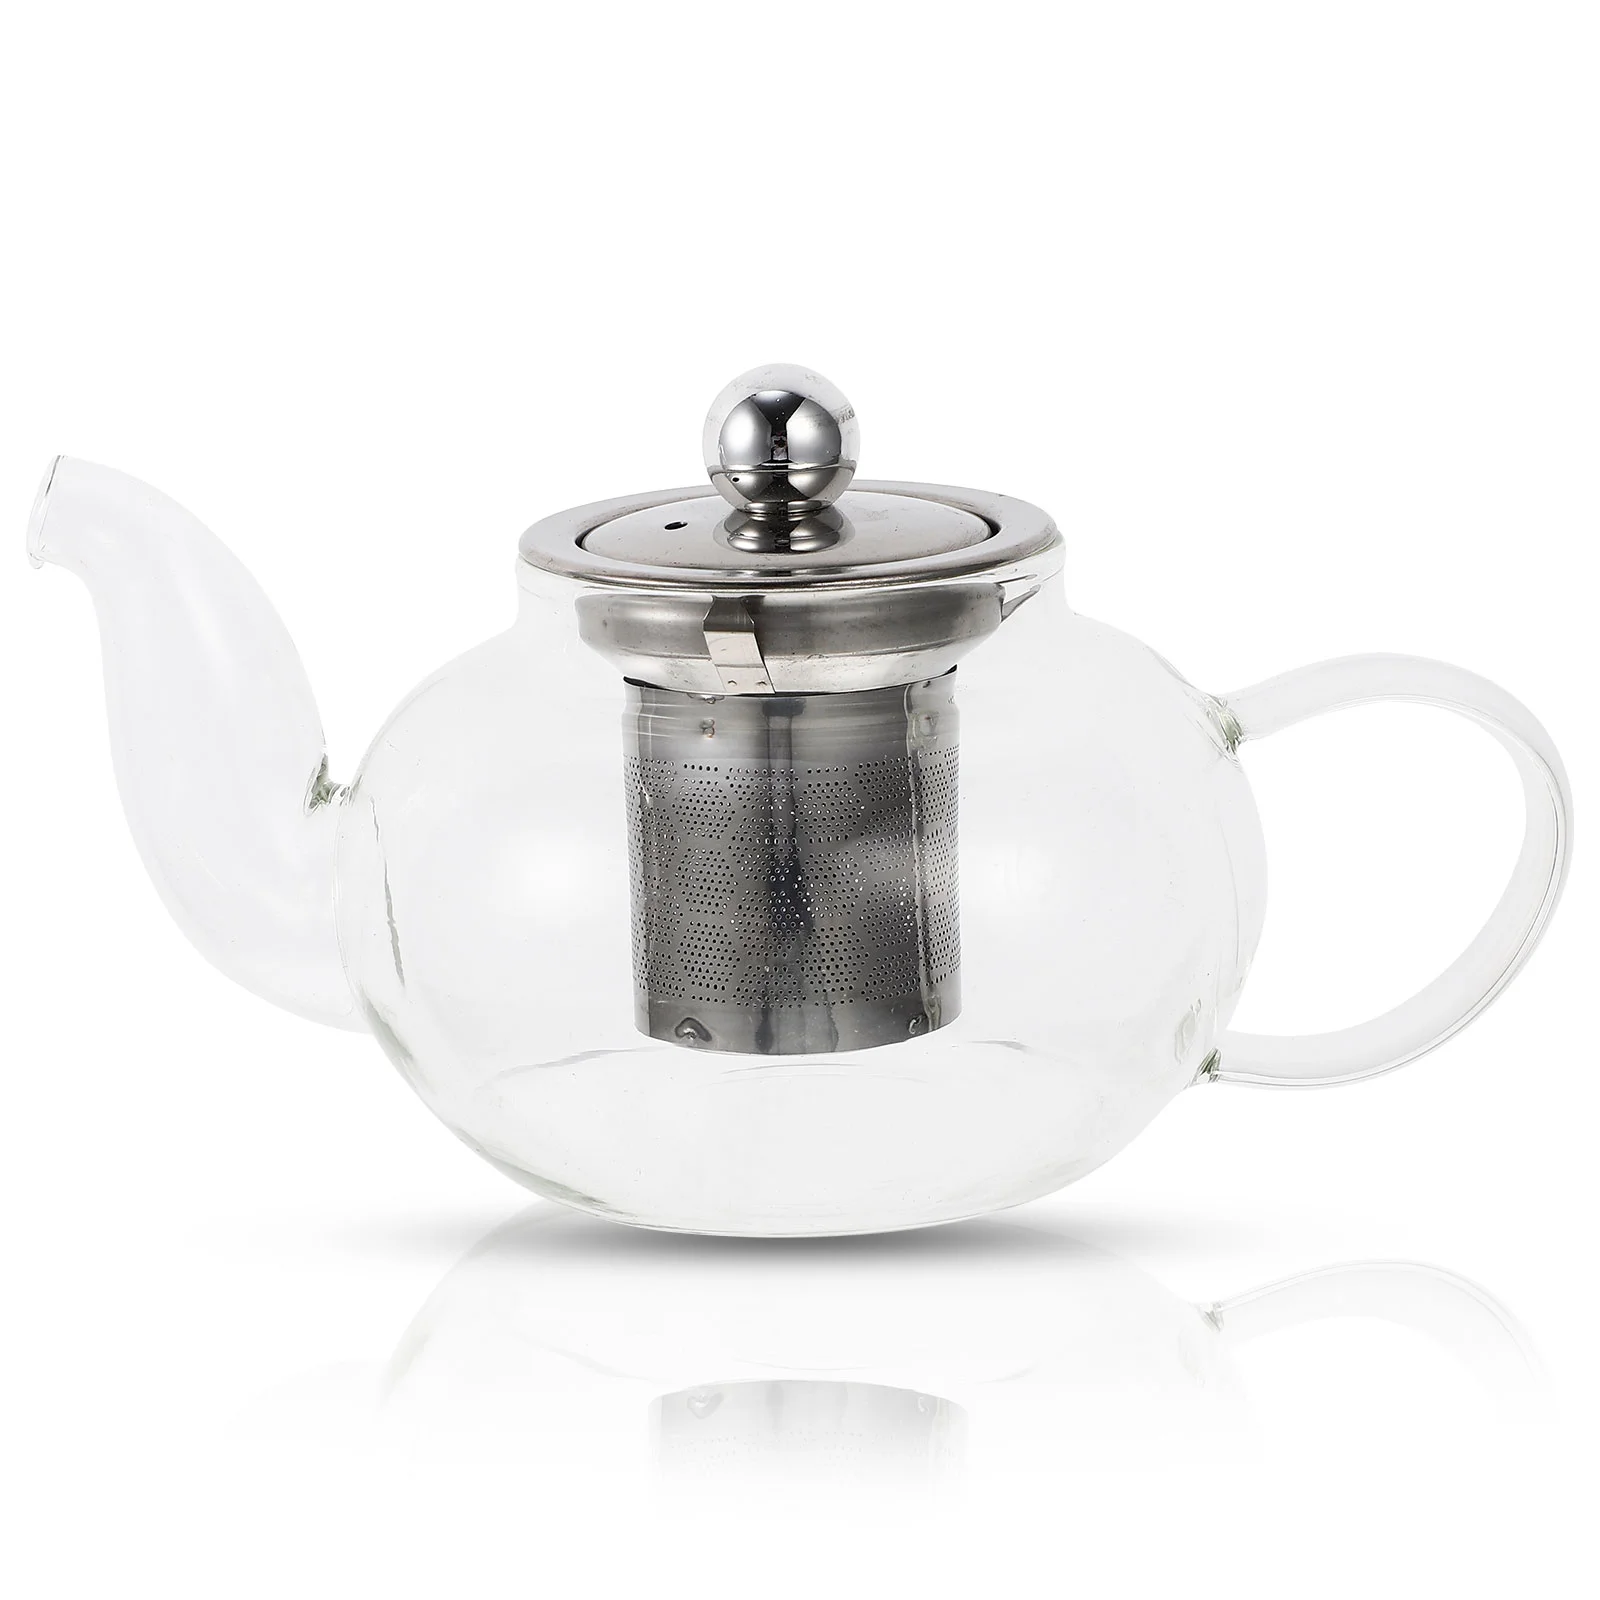 

Tea Teapot Kettle Pot Infuser Stovetop Water Loose Leaf Pitcher Strainer Filter Blooming Coffee Removable Boiling Clear